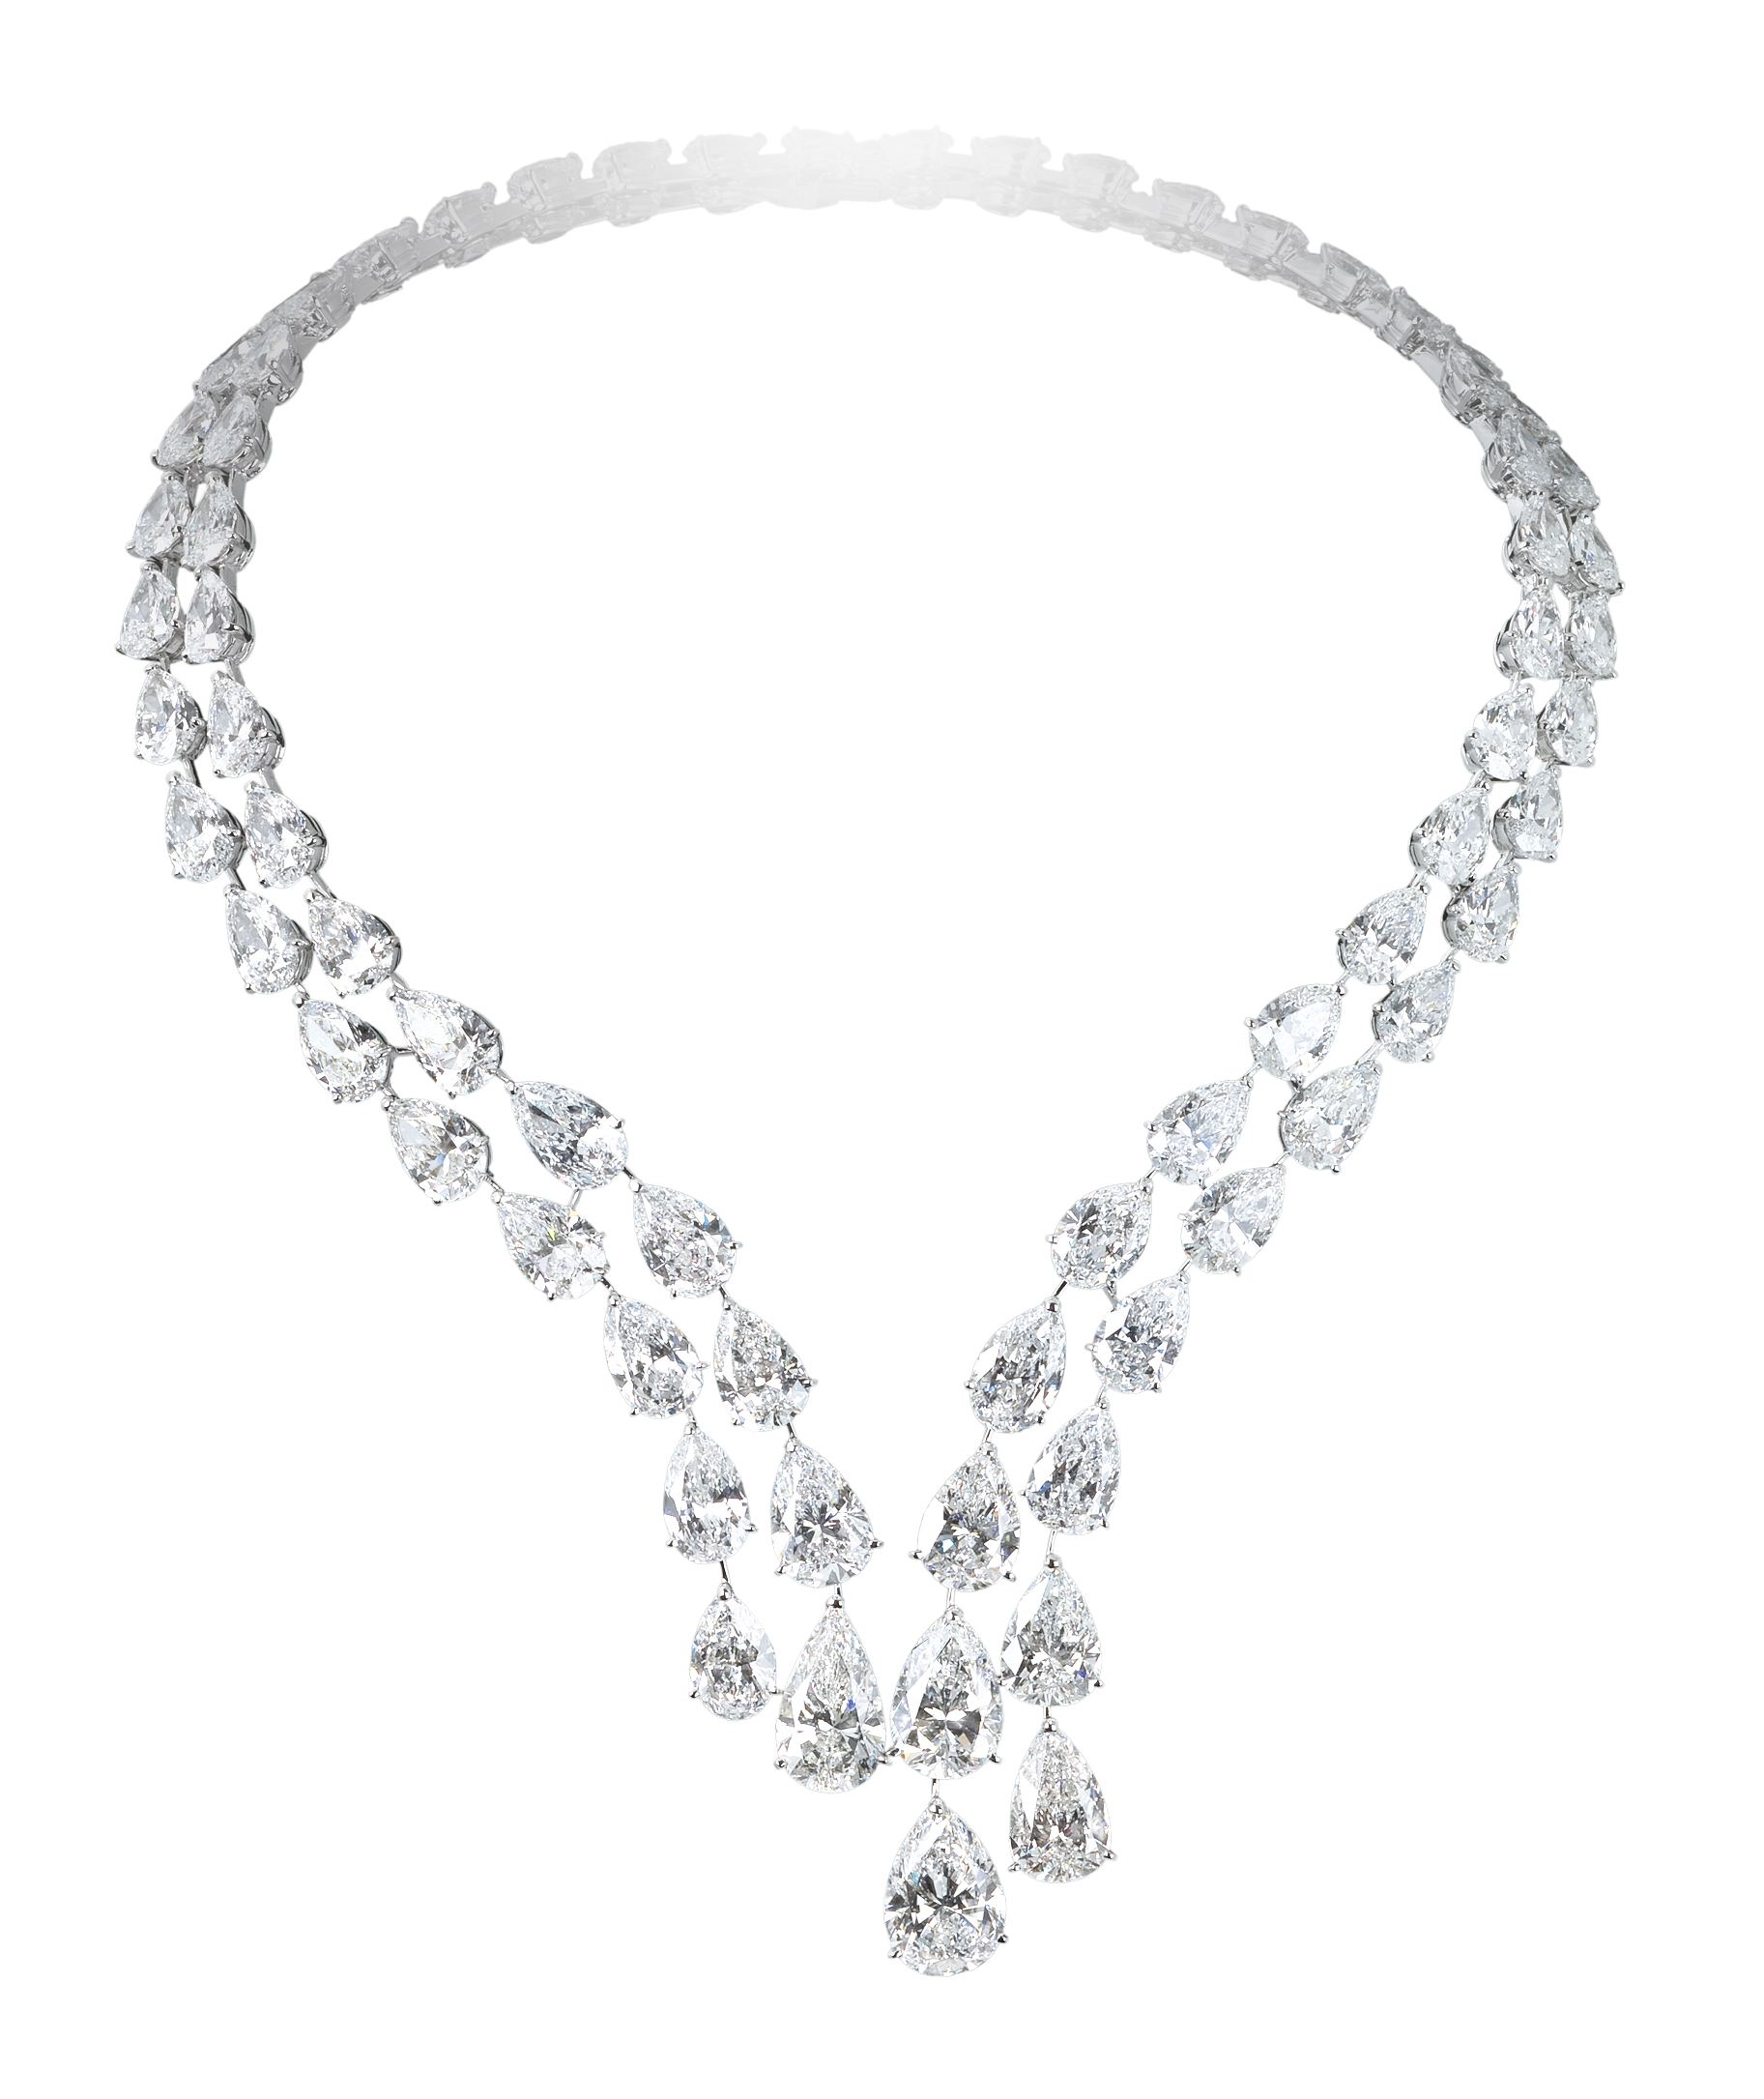 Moussaieffjewellers. Incredible double diamond necklace